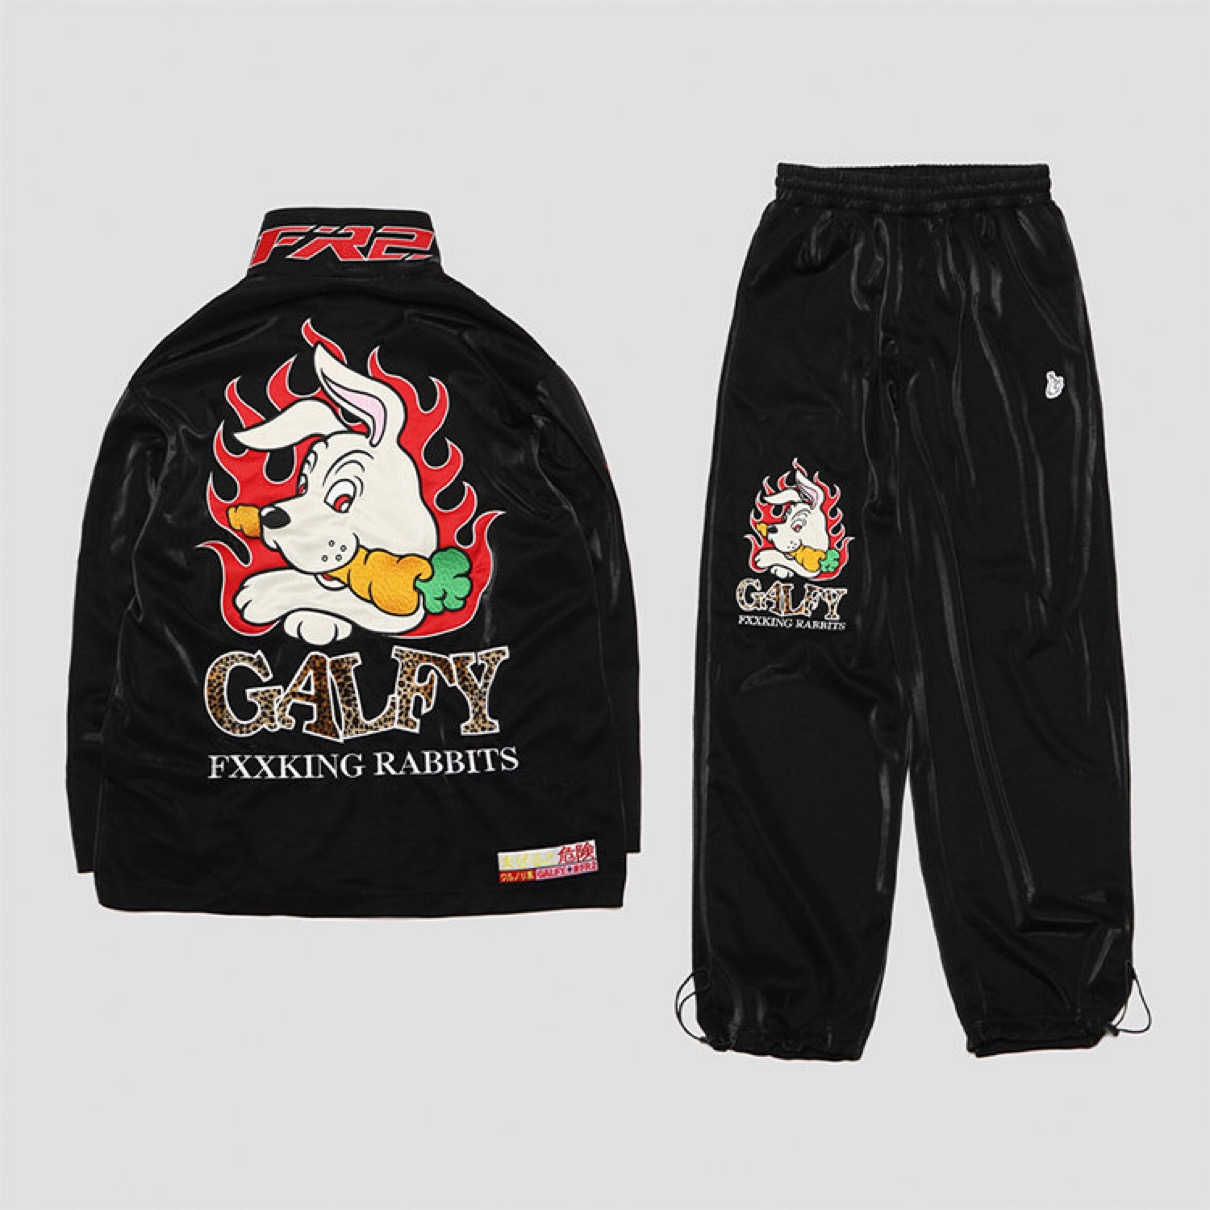 GALFY collaboration with #FR2 Blouson-